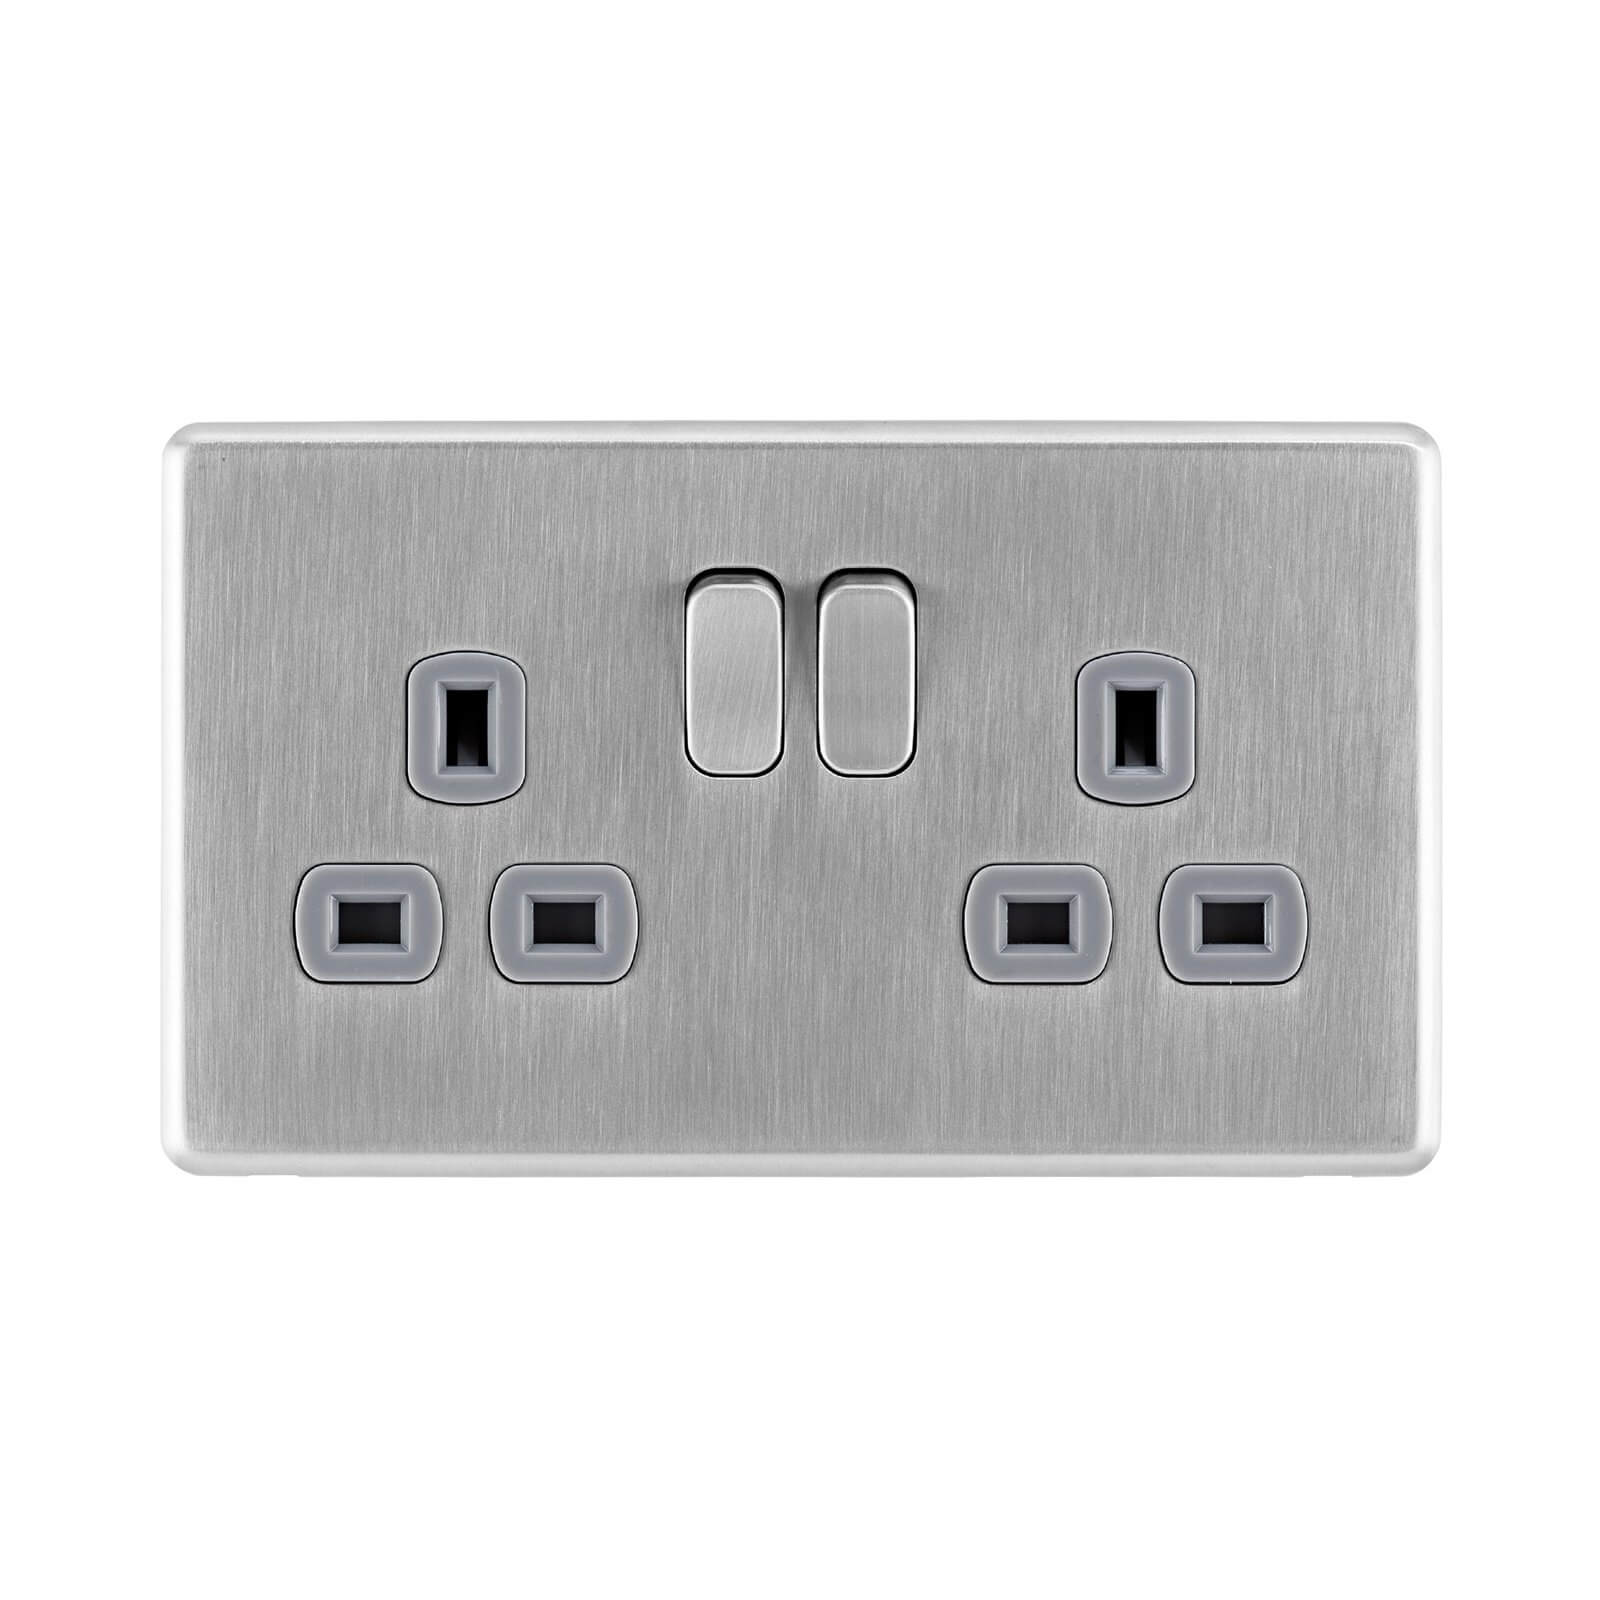 Arlec Fusion 13A 2 Gang Stainless Steel Double switched socket